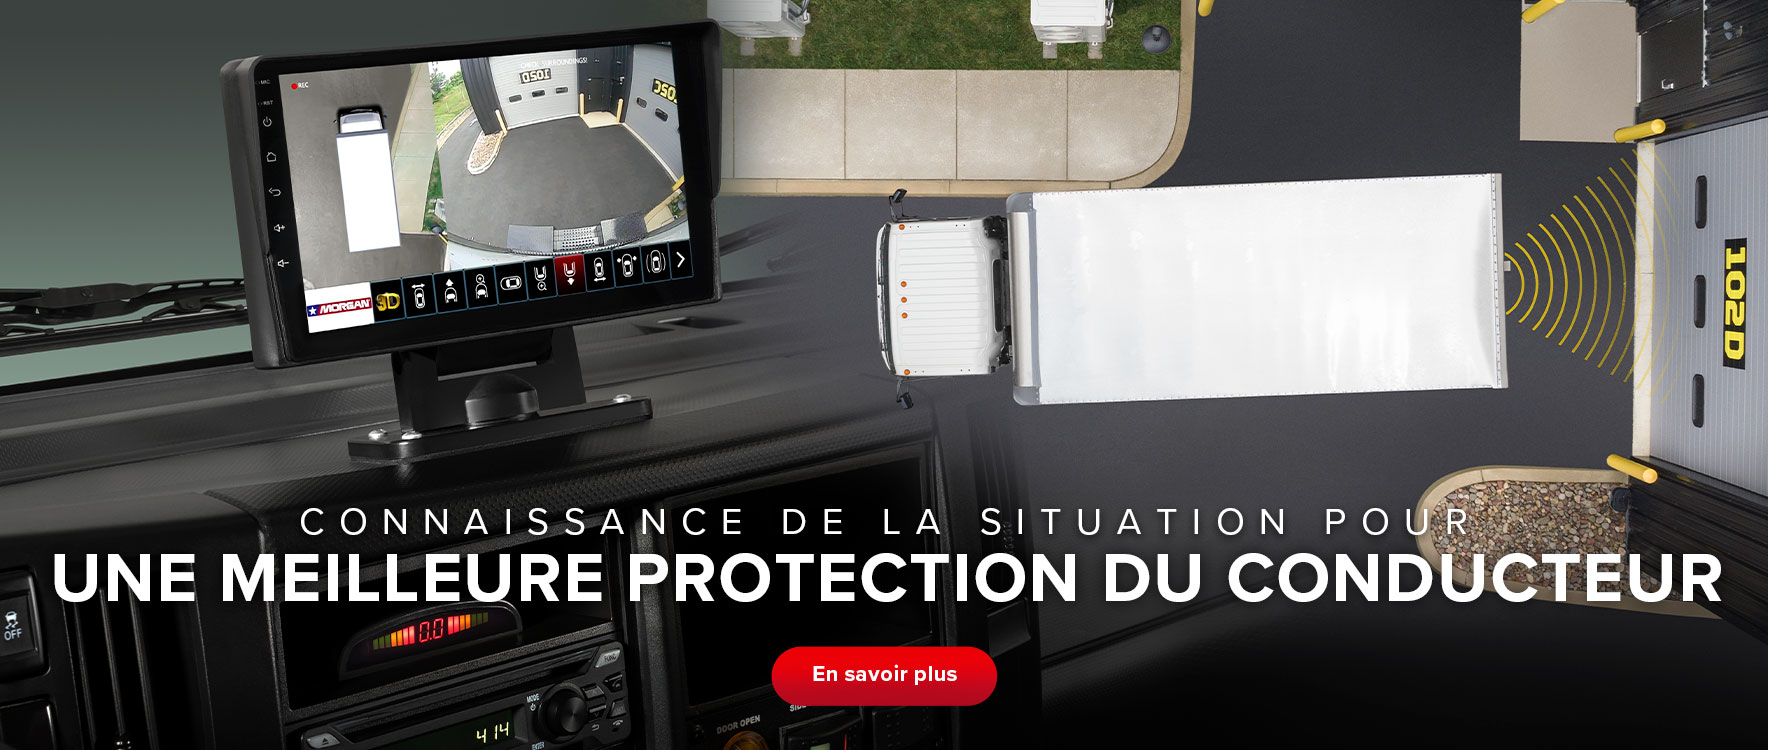 Situational Awareness Packages provide enhanced visibility inside and outside of the vehicle.